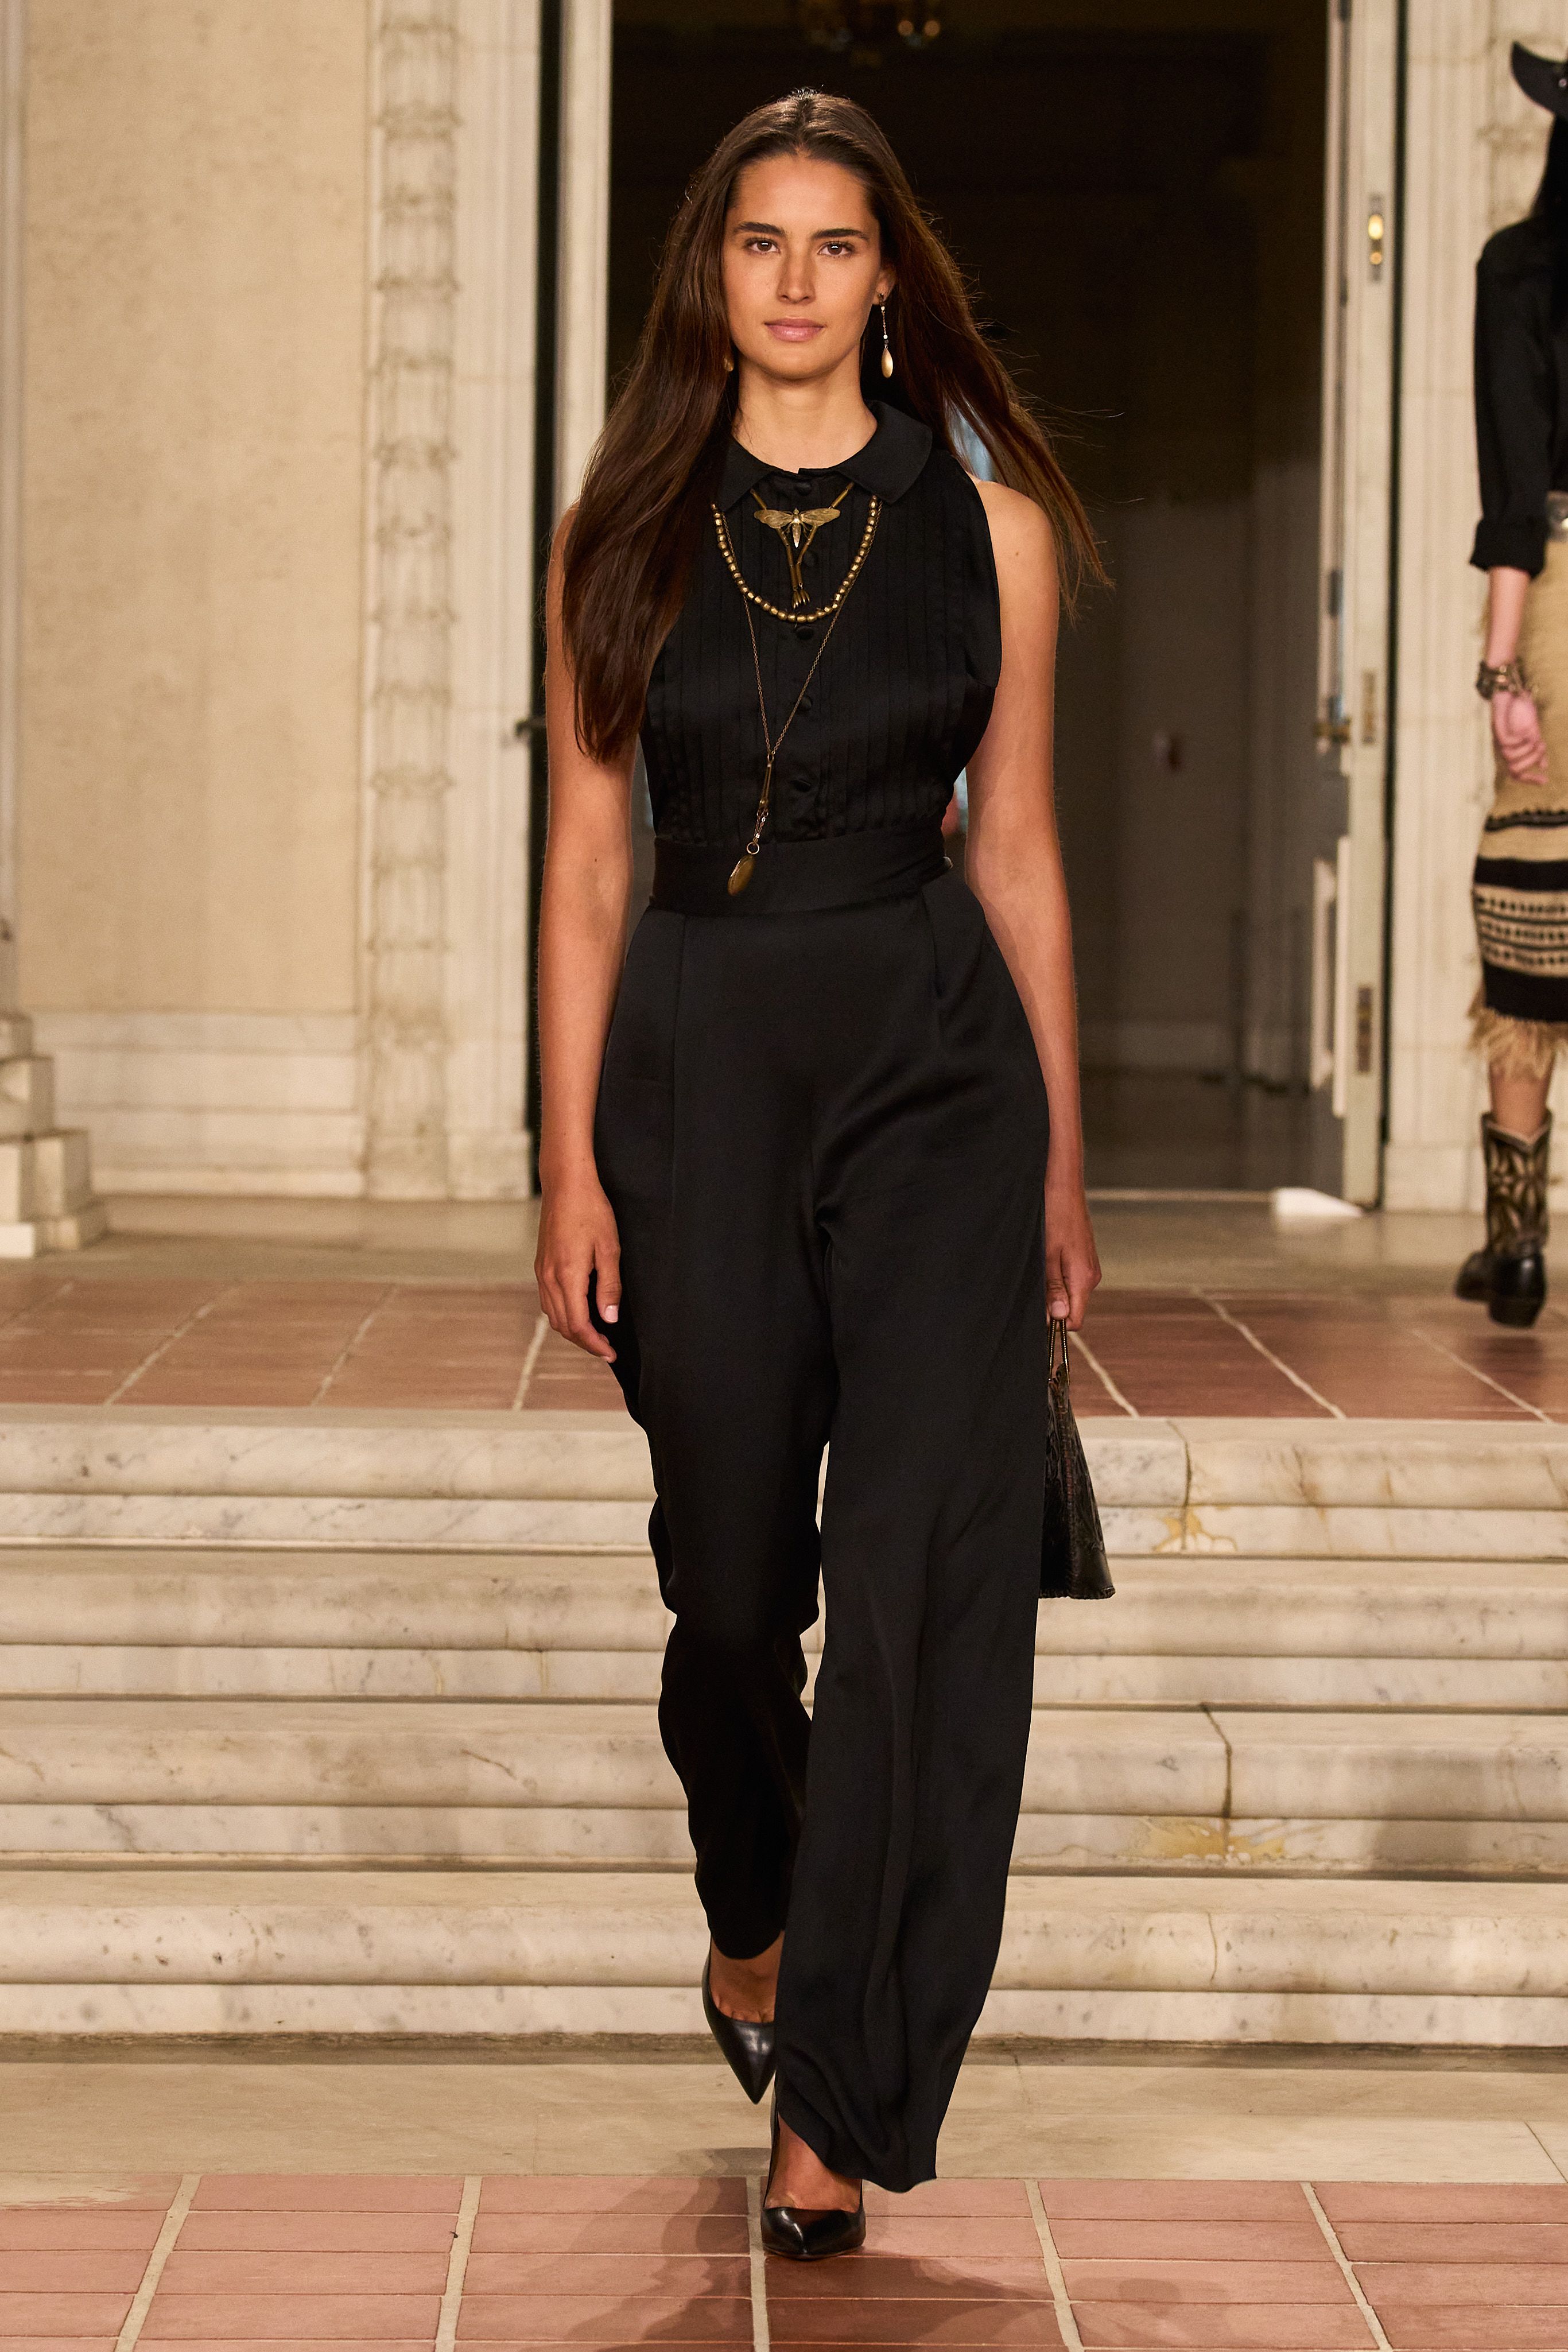 Ralph Lauren Ready To Wear Fashion Show, Collection Fall Winter